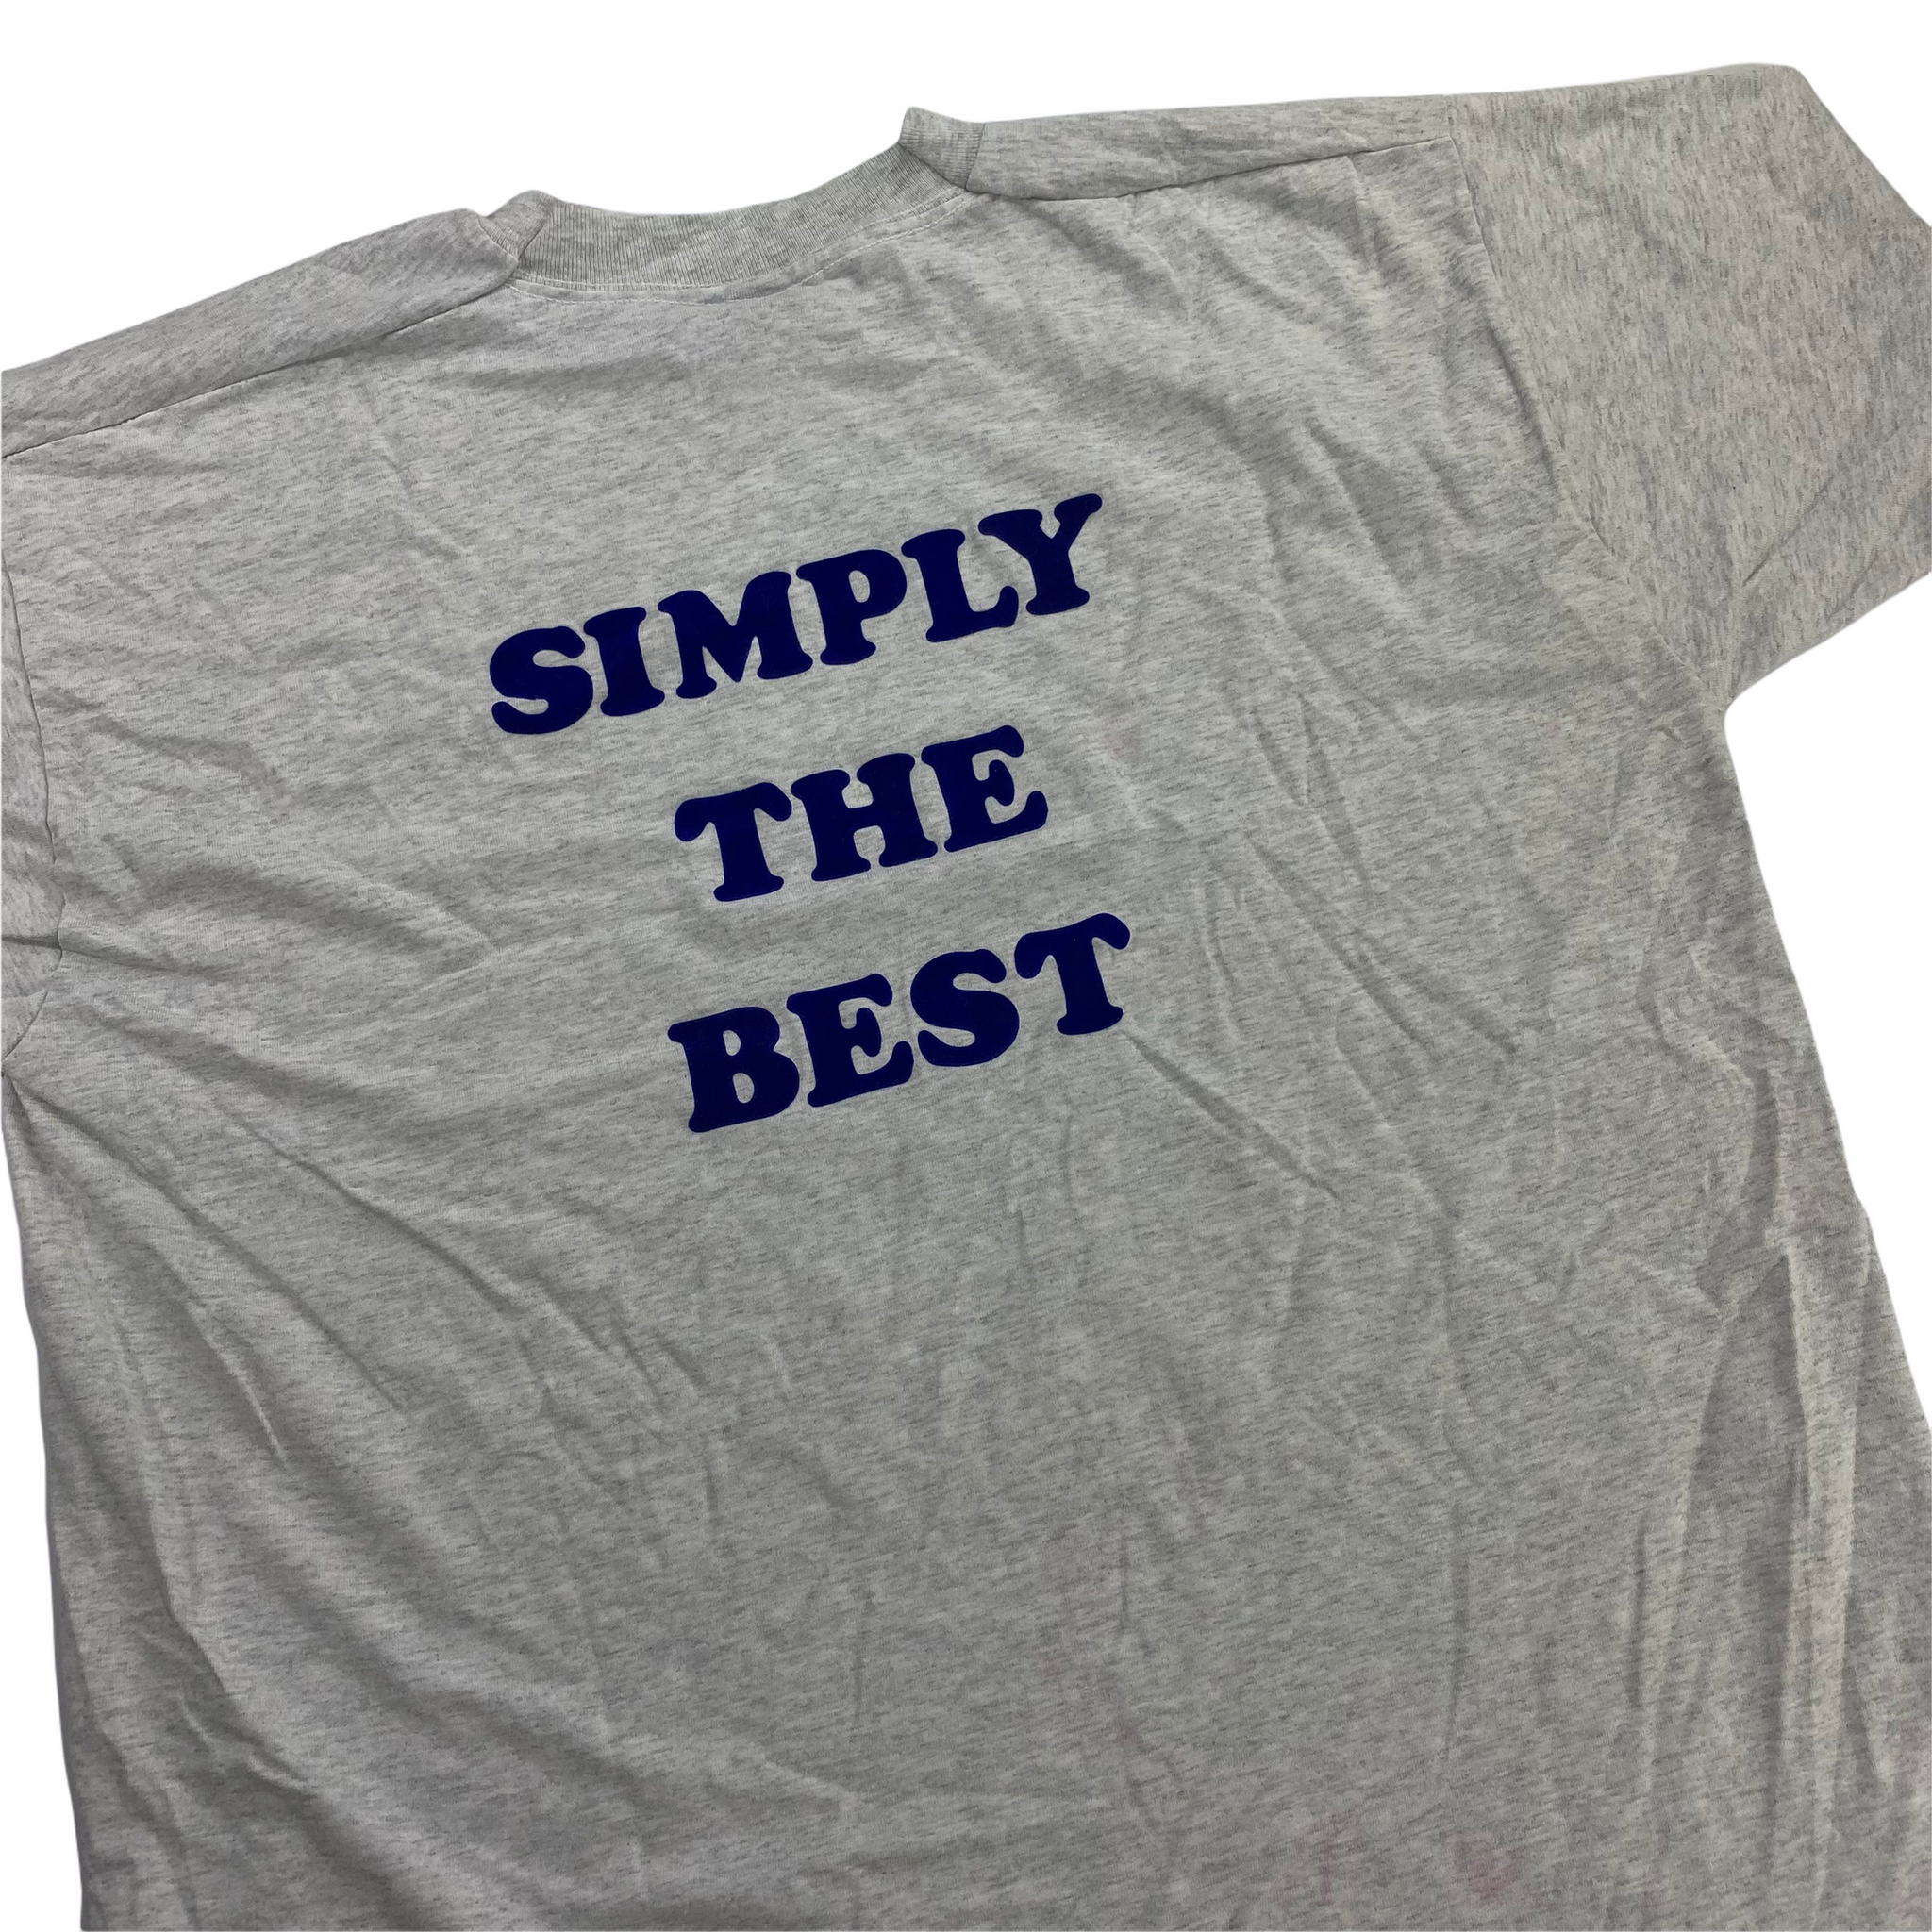 90s Simply the best tee. L/XL